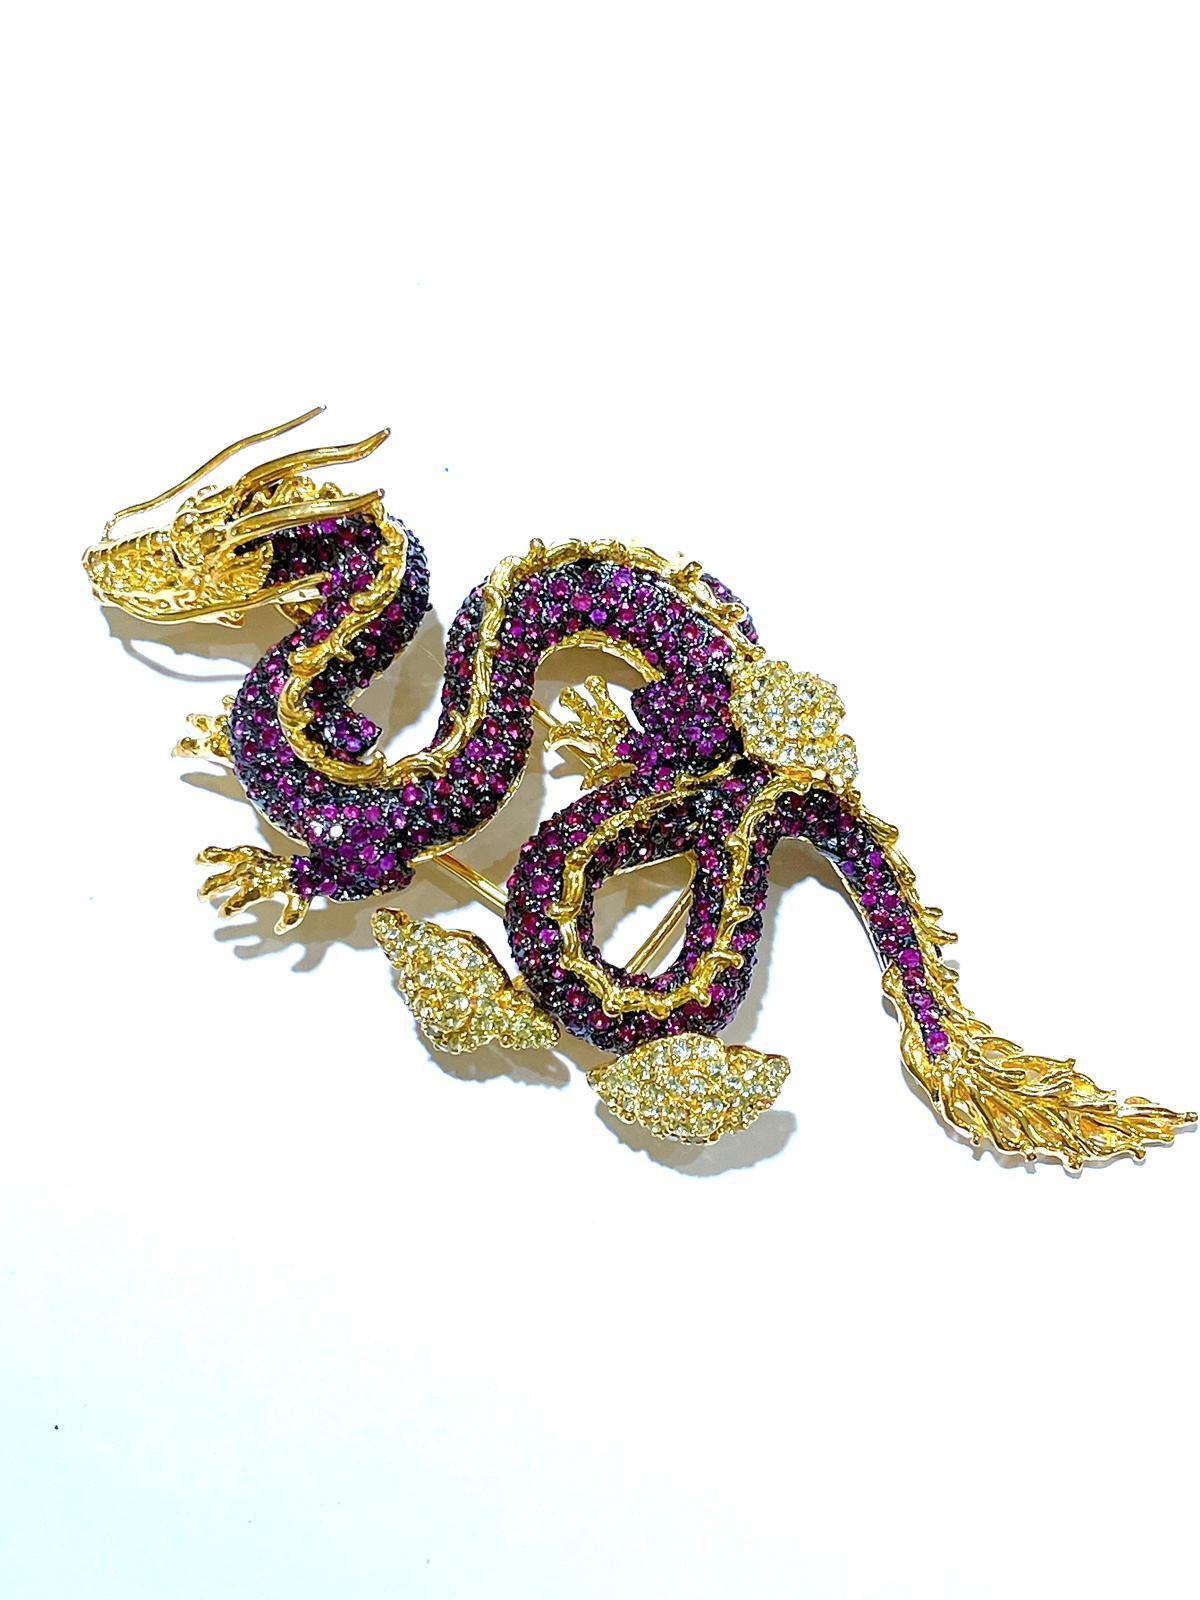 Bochic Dragon “Orient” Ruby & White Zircon Brooch In 18K Gold & Silver  In New Condition For Sale In New York, NY